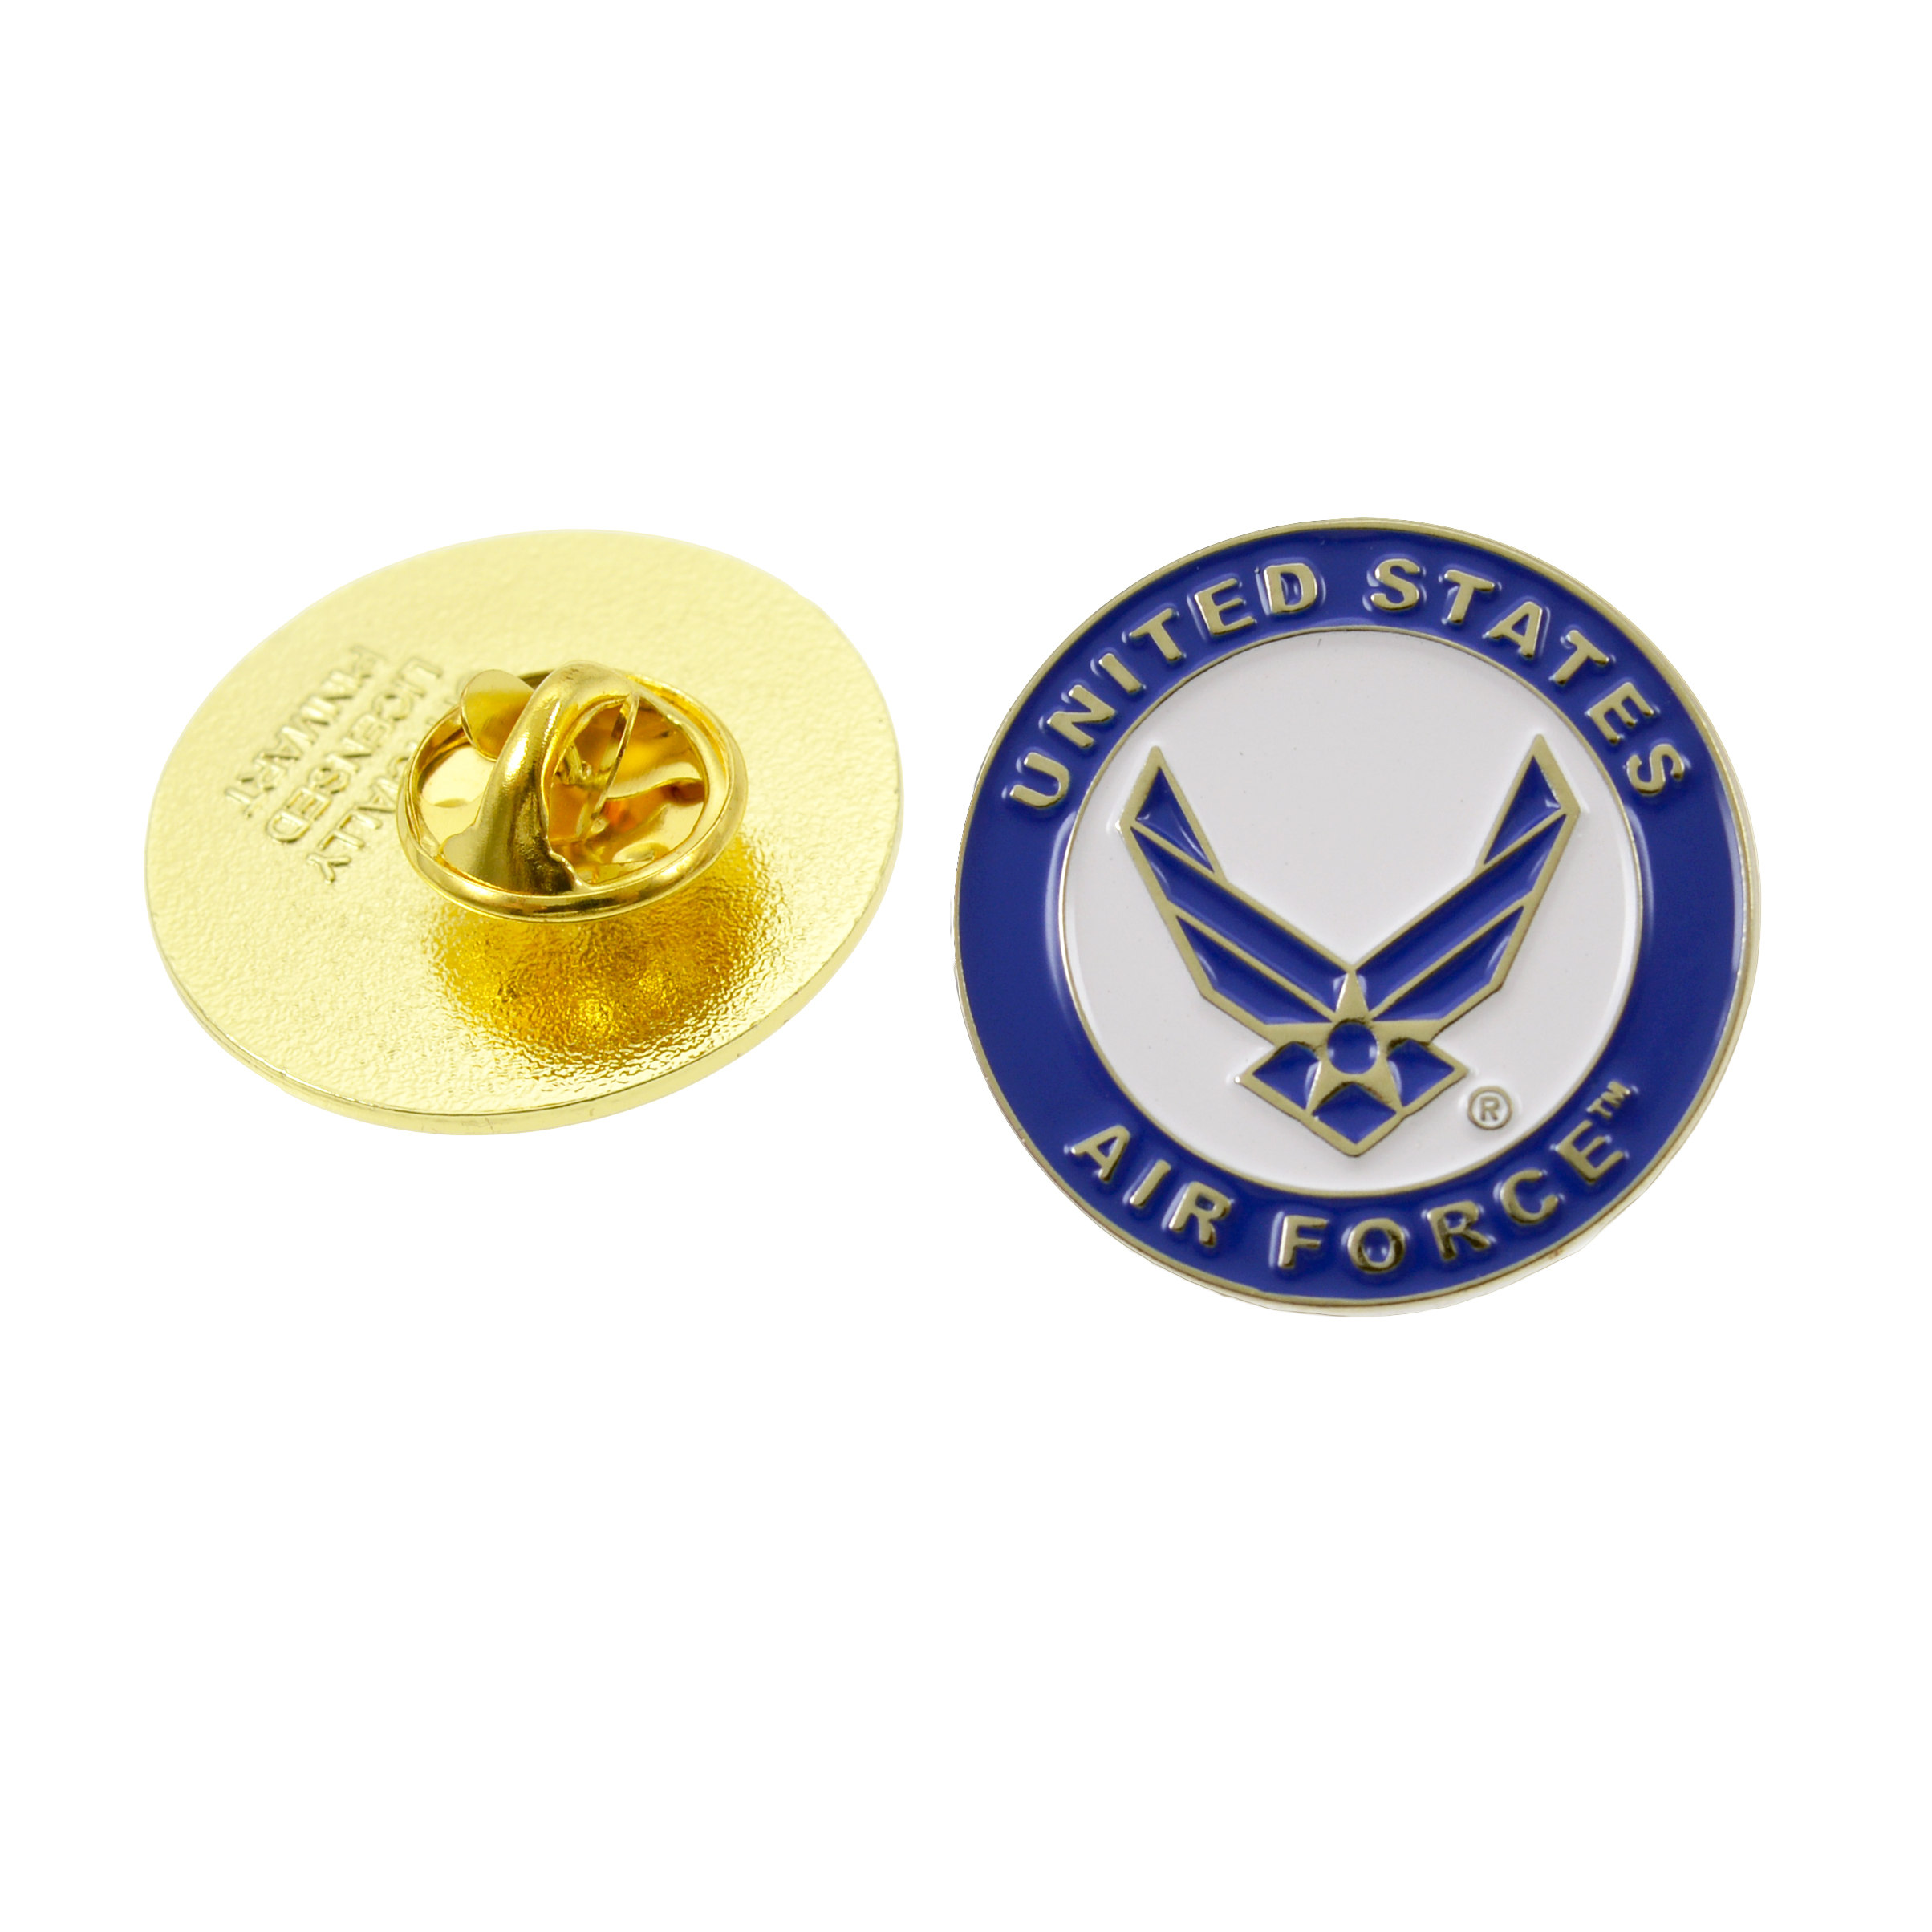 UNITED STATES AIR FORCEのピンバッジ